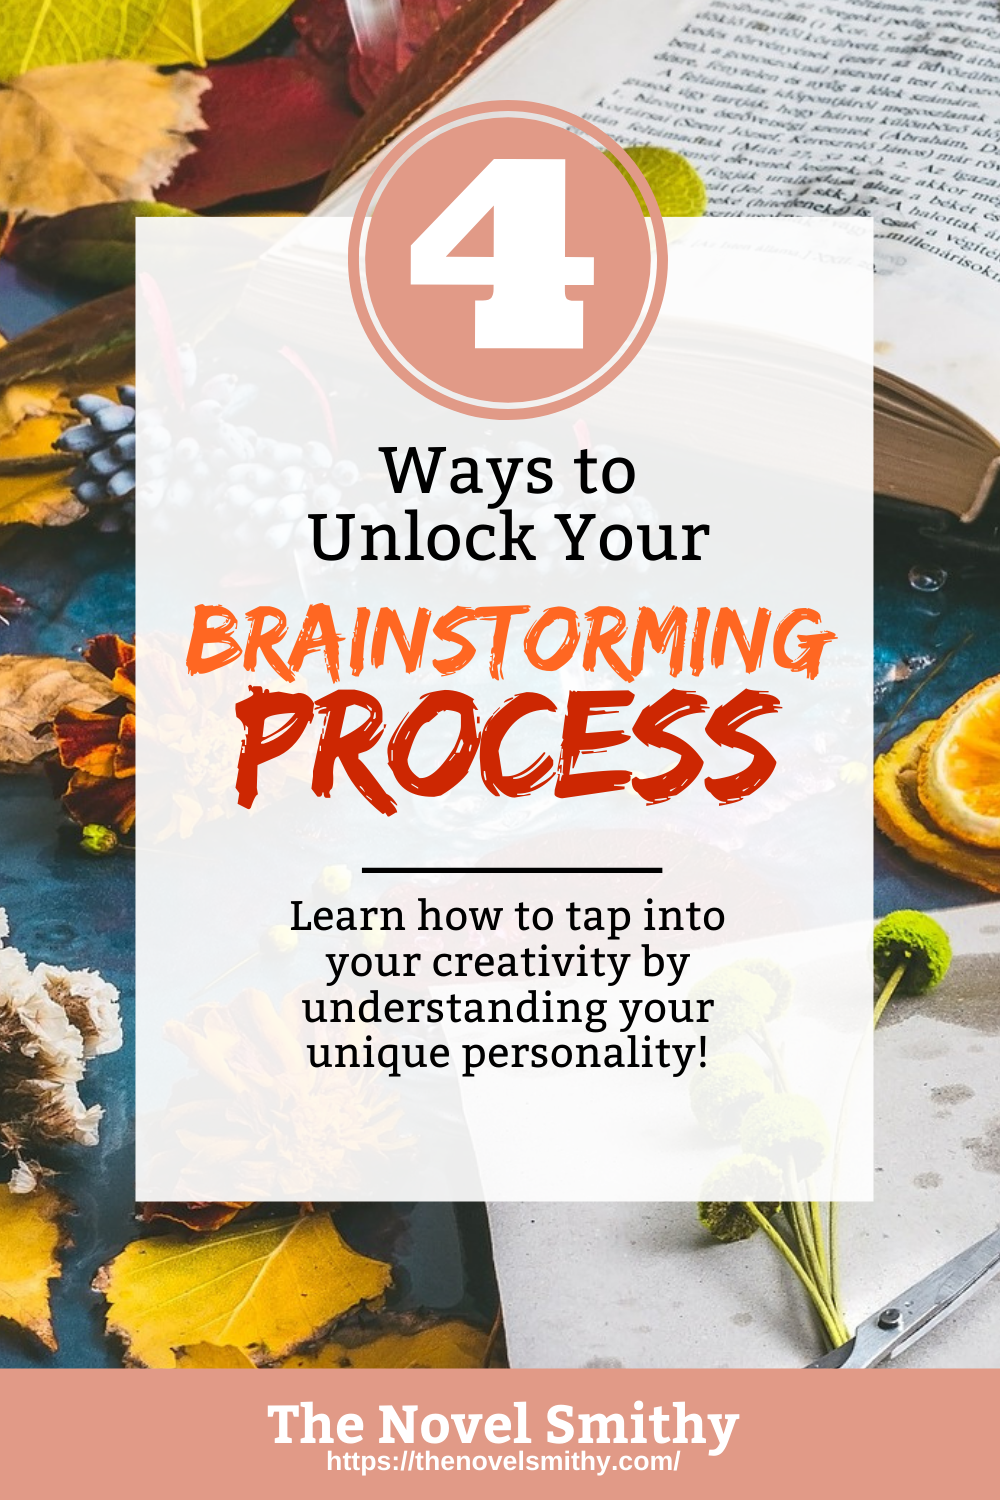 4 Ways to Unlock Your Brainstorming Process